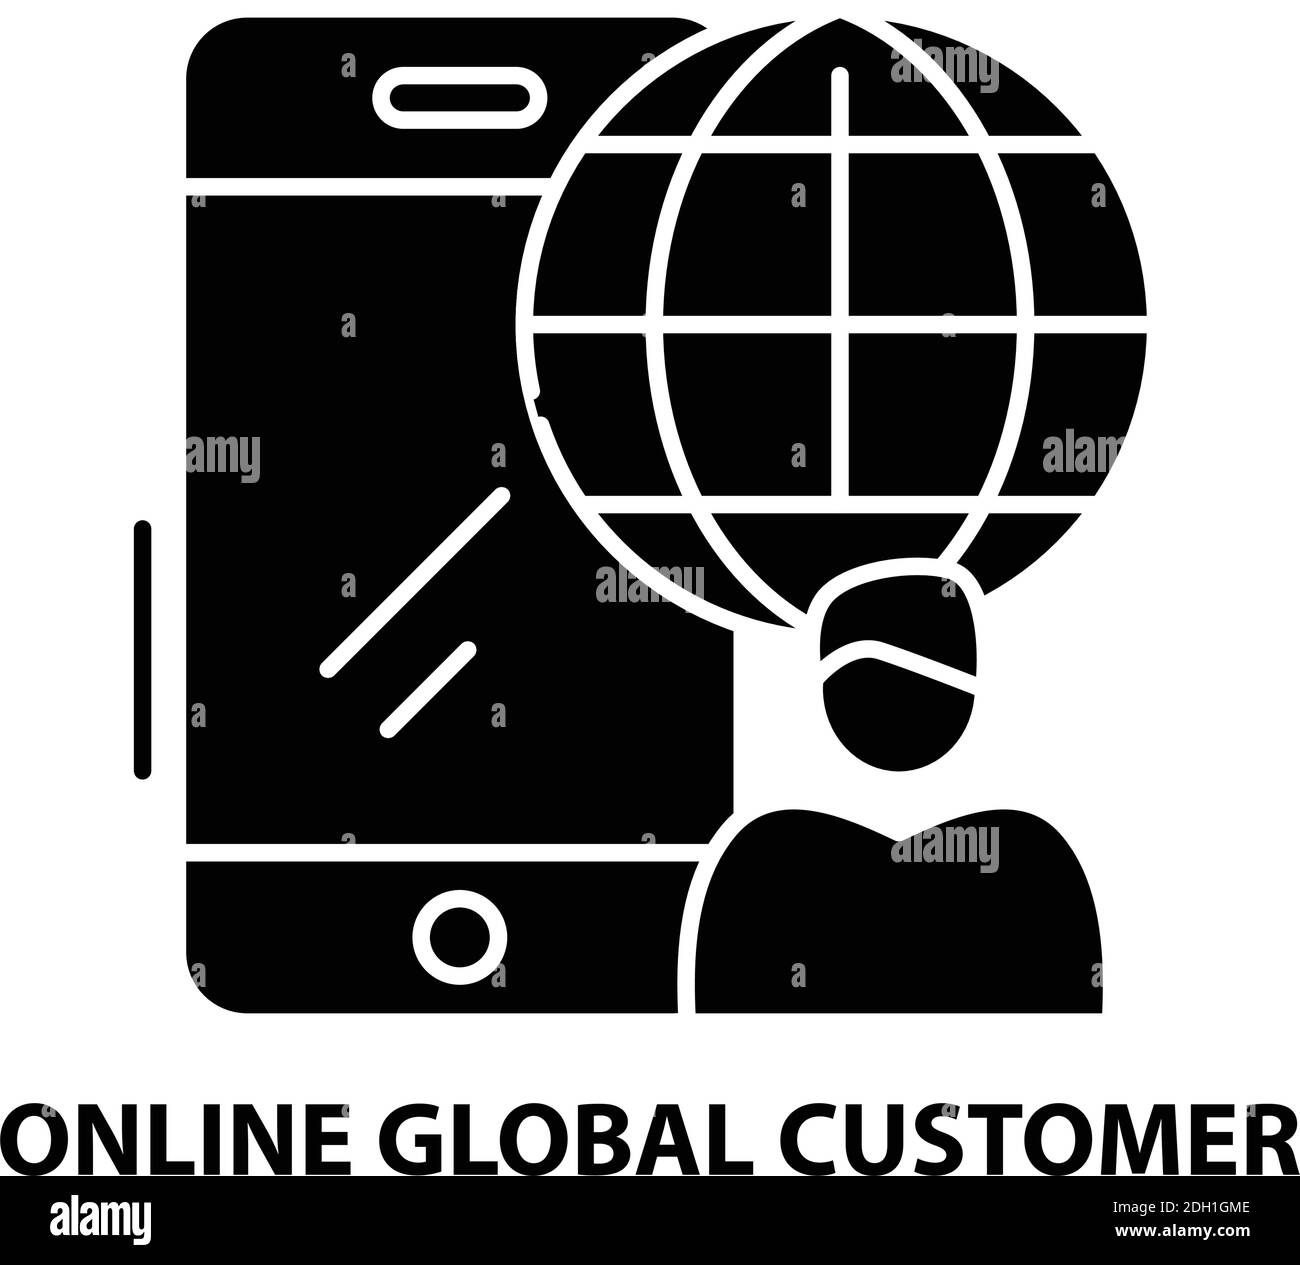 online global customer icon, black vector sign with editable strokes, concept illustration Stock Vector